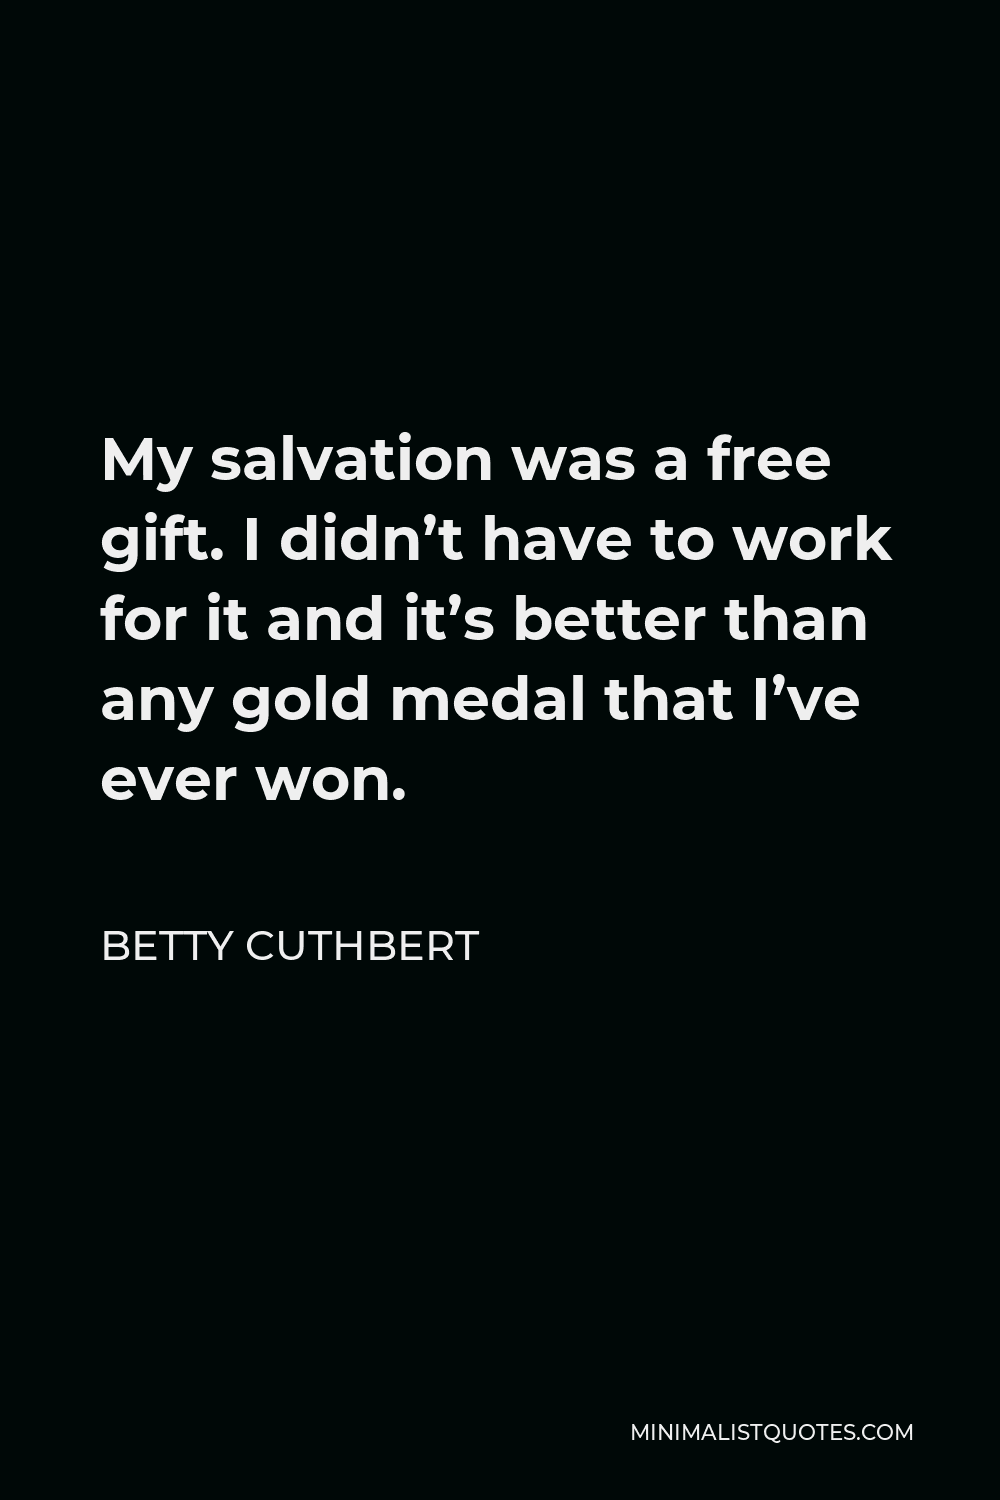 Betty Cuthbert Quote - My salvation was a free gift. I didn’t have to work for it and it’s better than any gold medal that I’ve ever won.